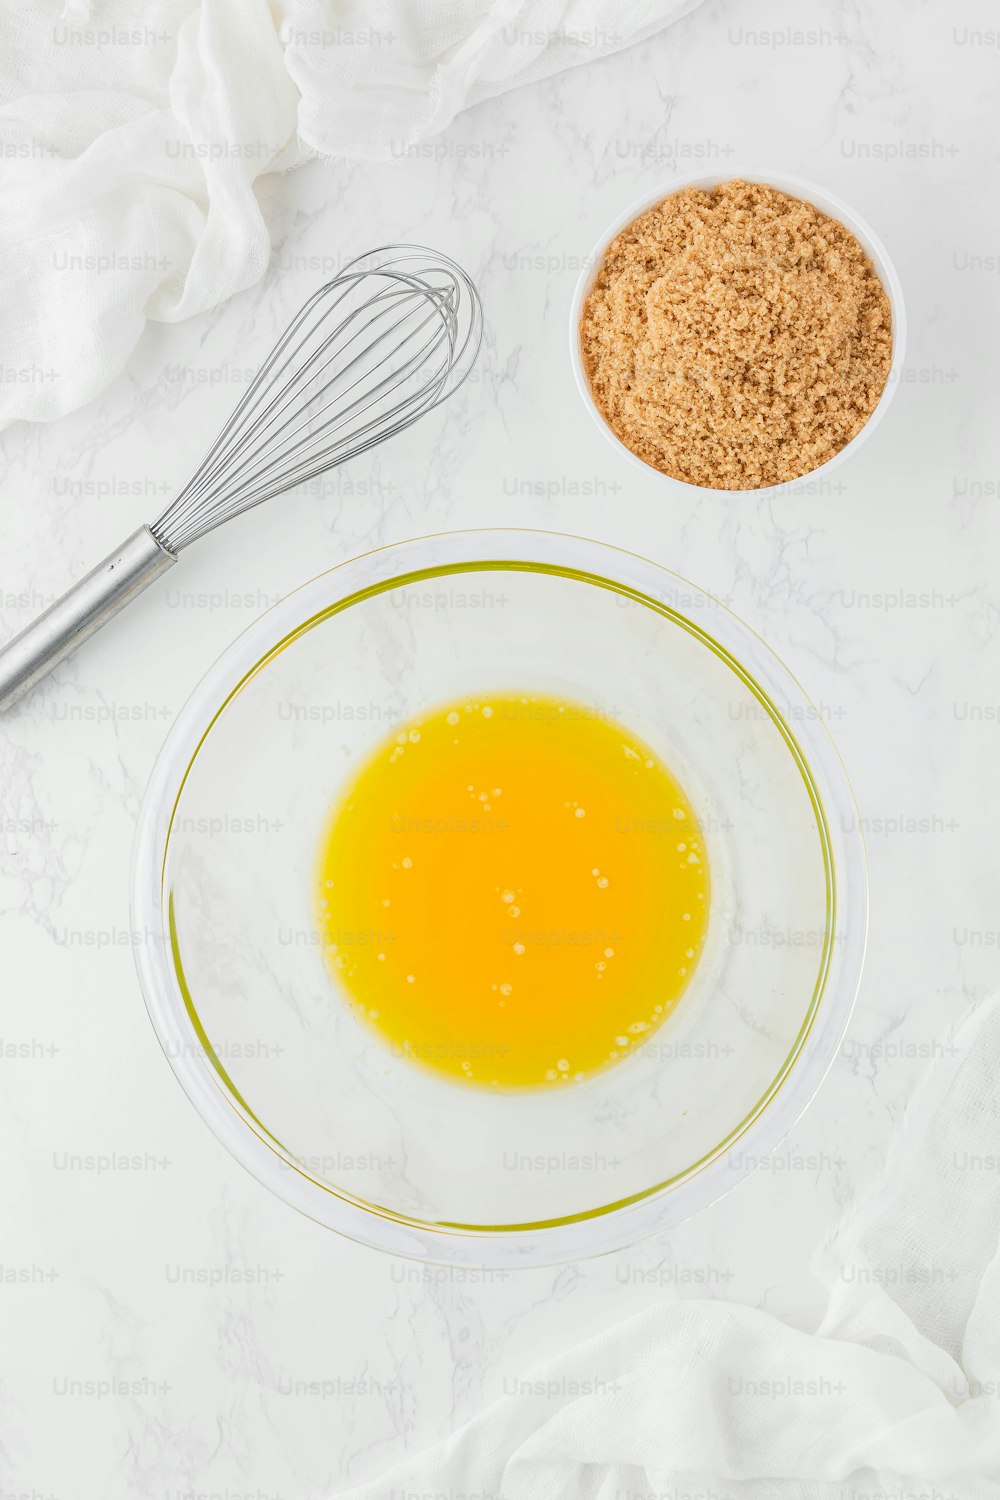 a bowl of orange juice, a whisk and a whisk on